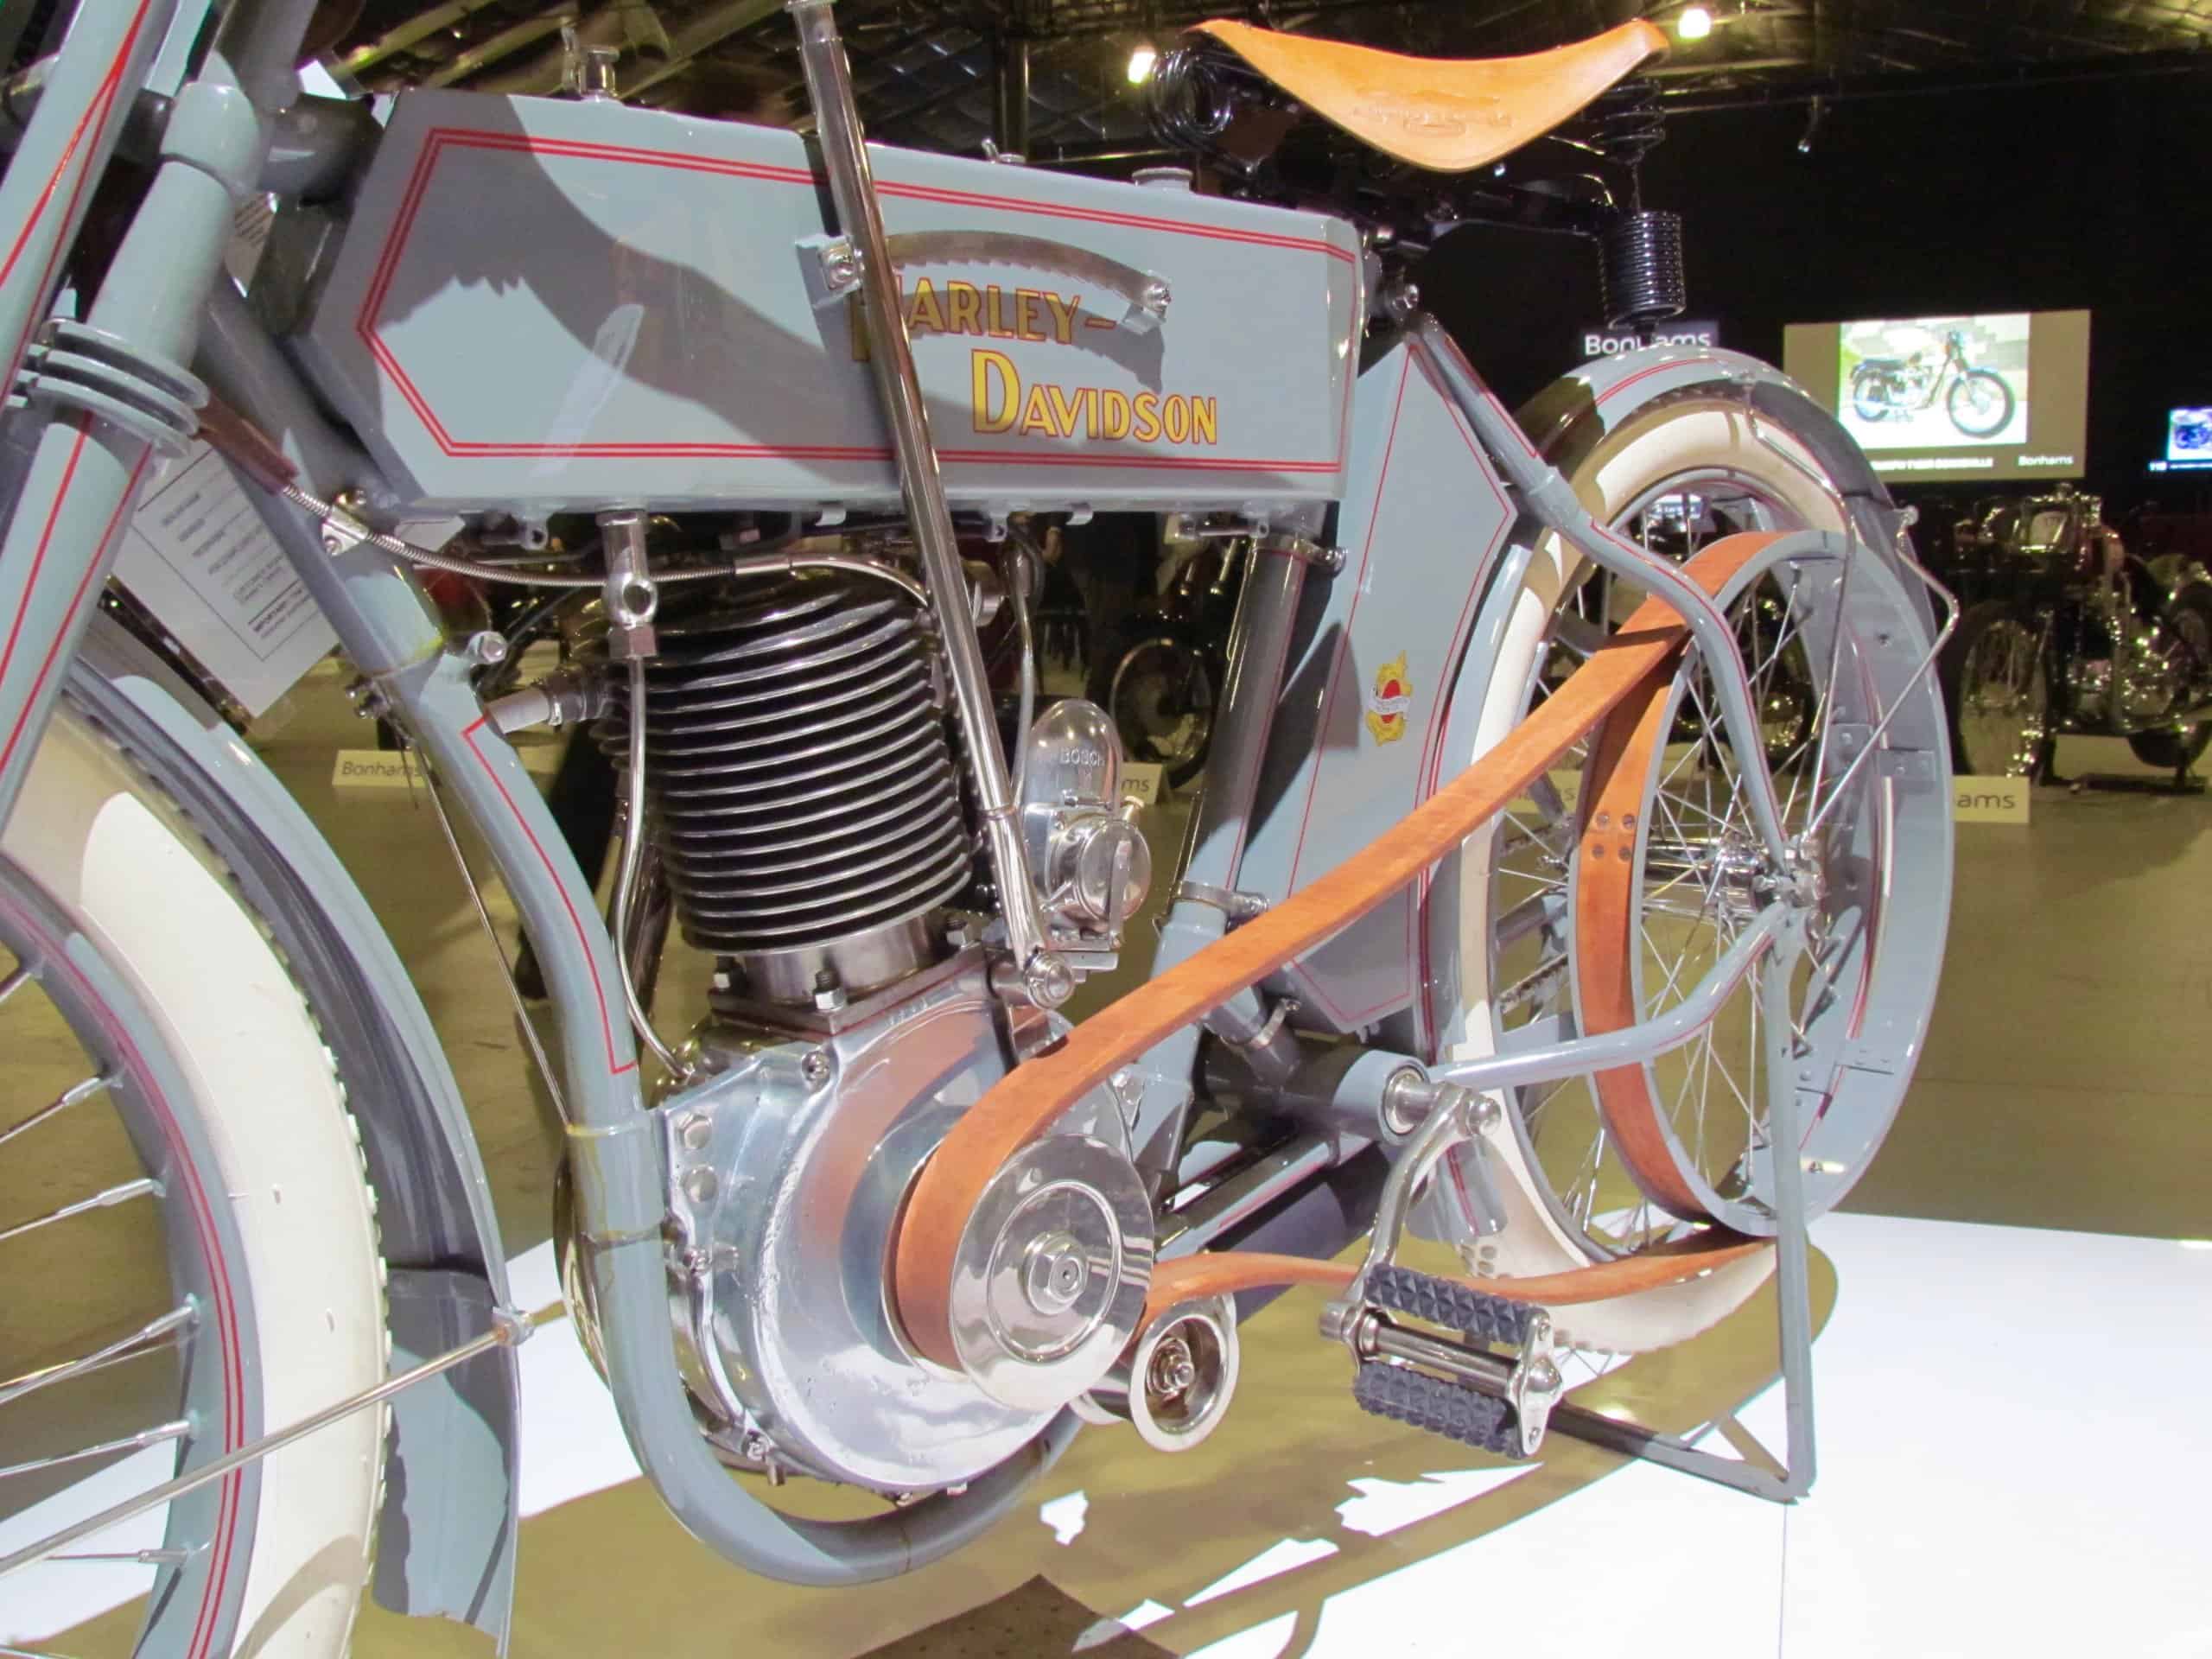 Vintage motorcycles, The gorgeous artistry of the vintage motorcycle, ClassicCars.com Journal